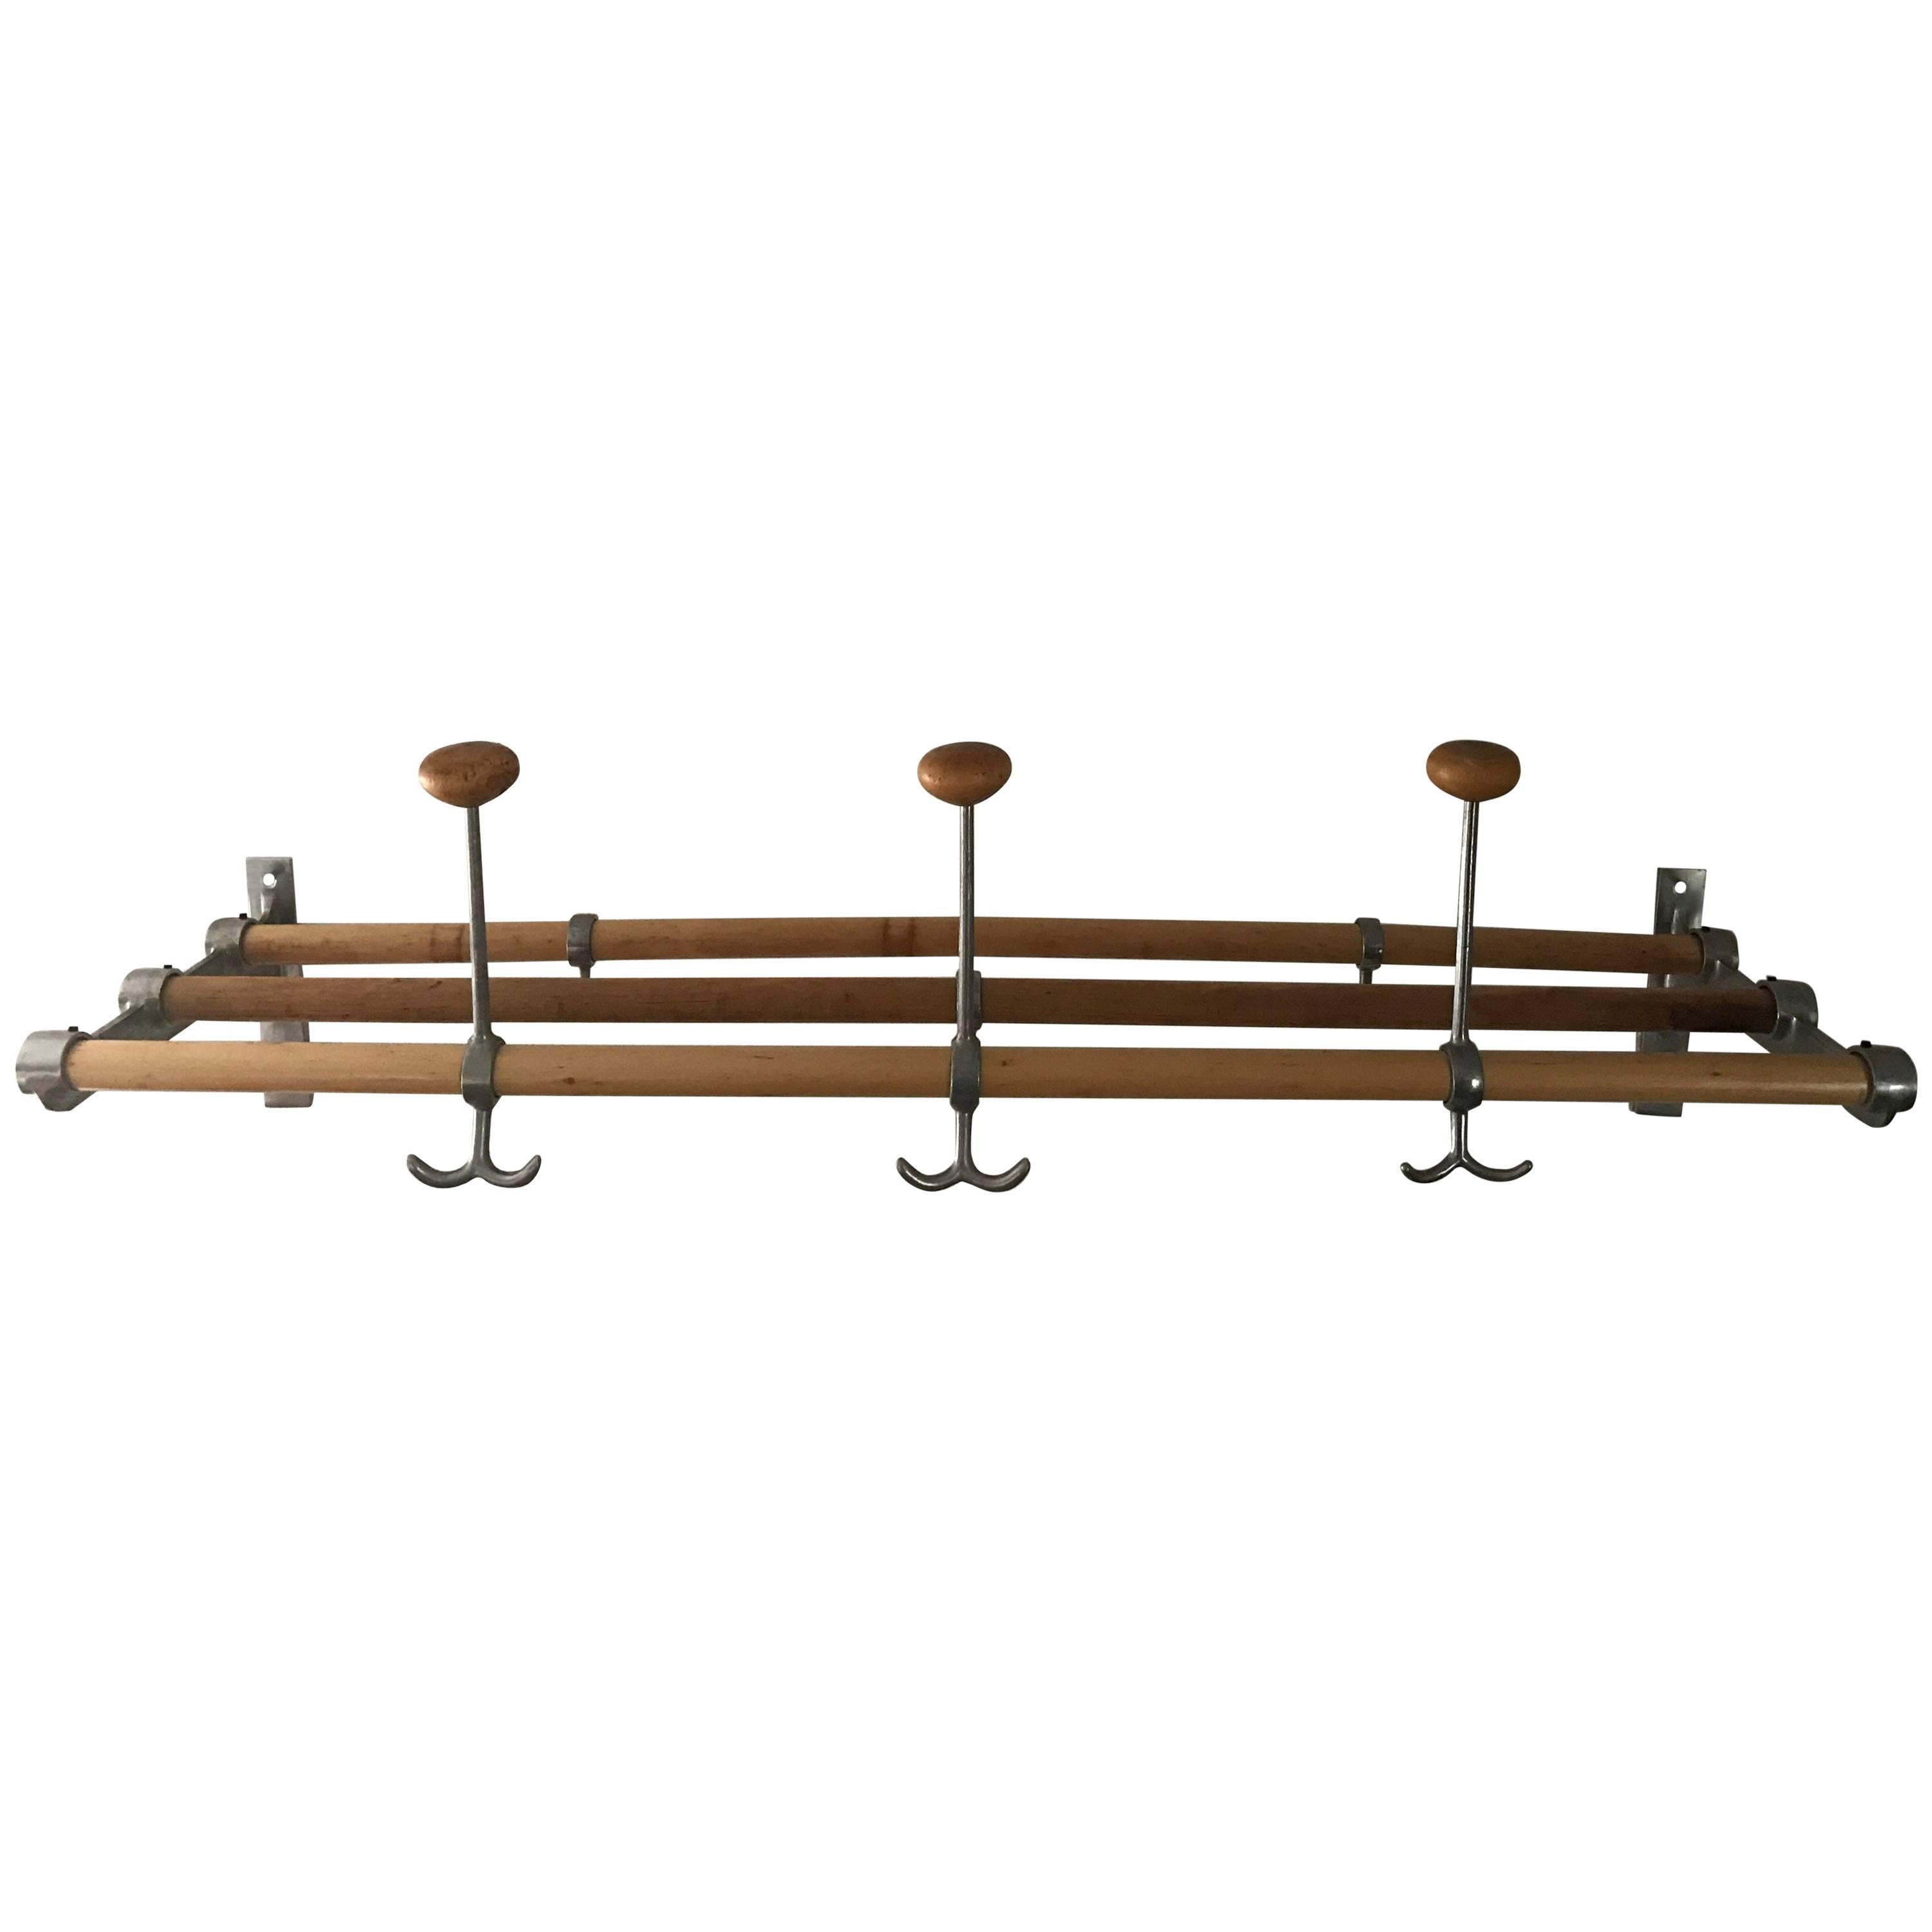 Mid-20th Century Swedish Functionalistic Coat and Hat Rack Wall Mount For Sale